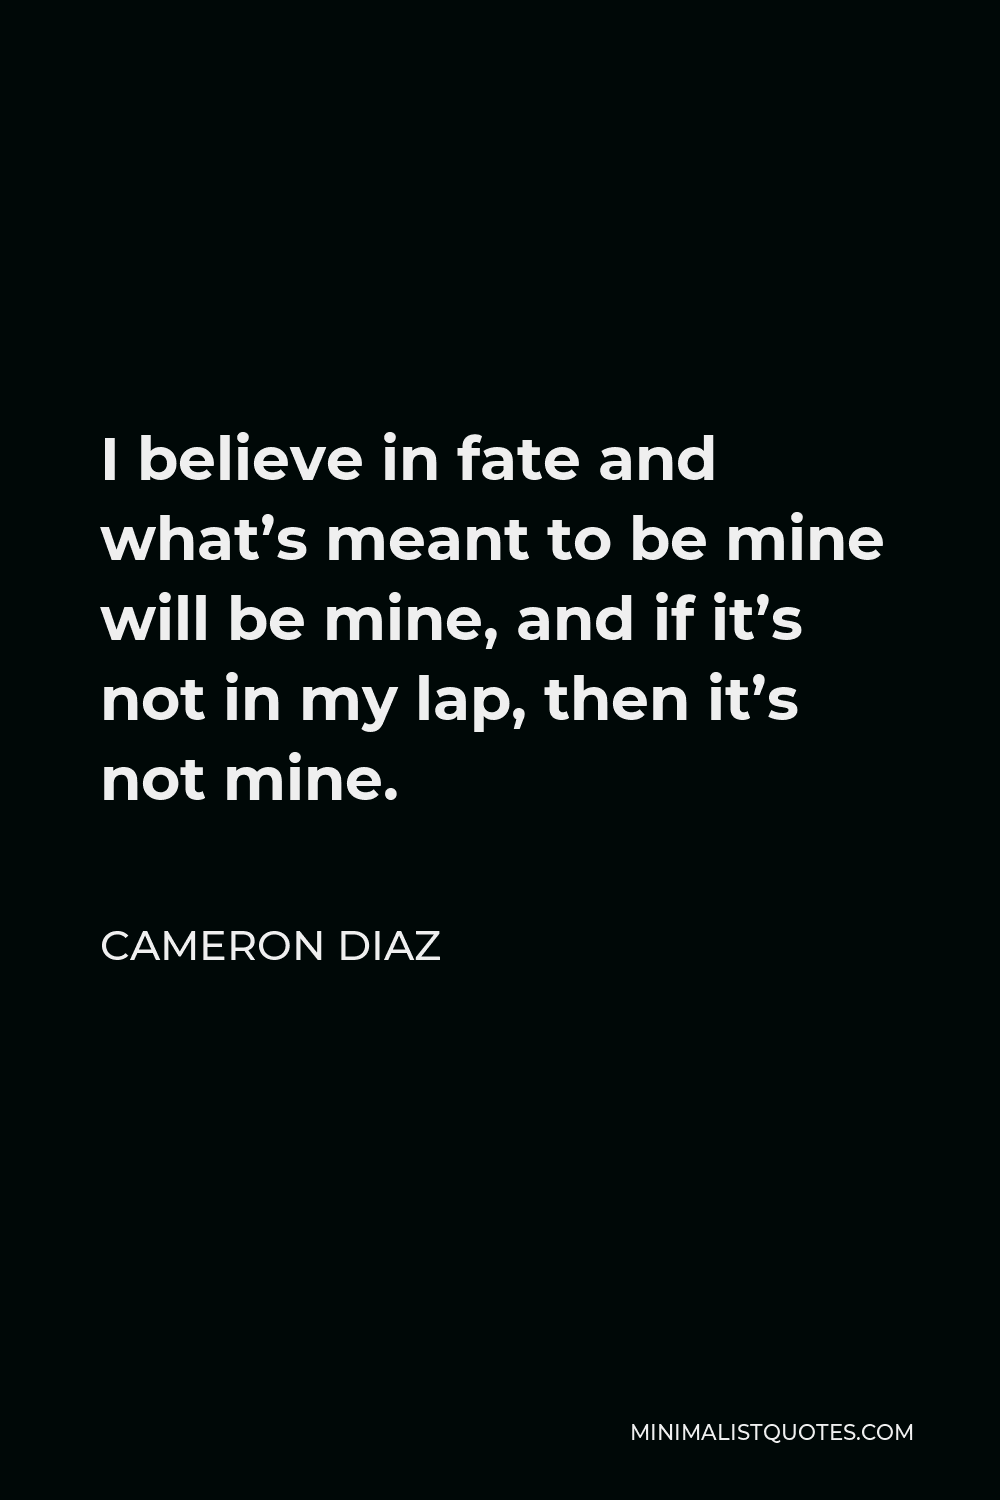 Cameron Diaz Quote - I believe in fate and what’s meant to be mine will be mine, and if it’s not in my lap, then it’s not mine.